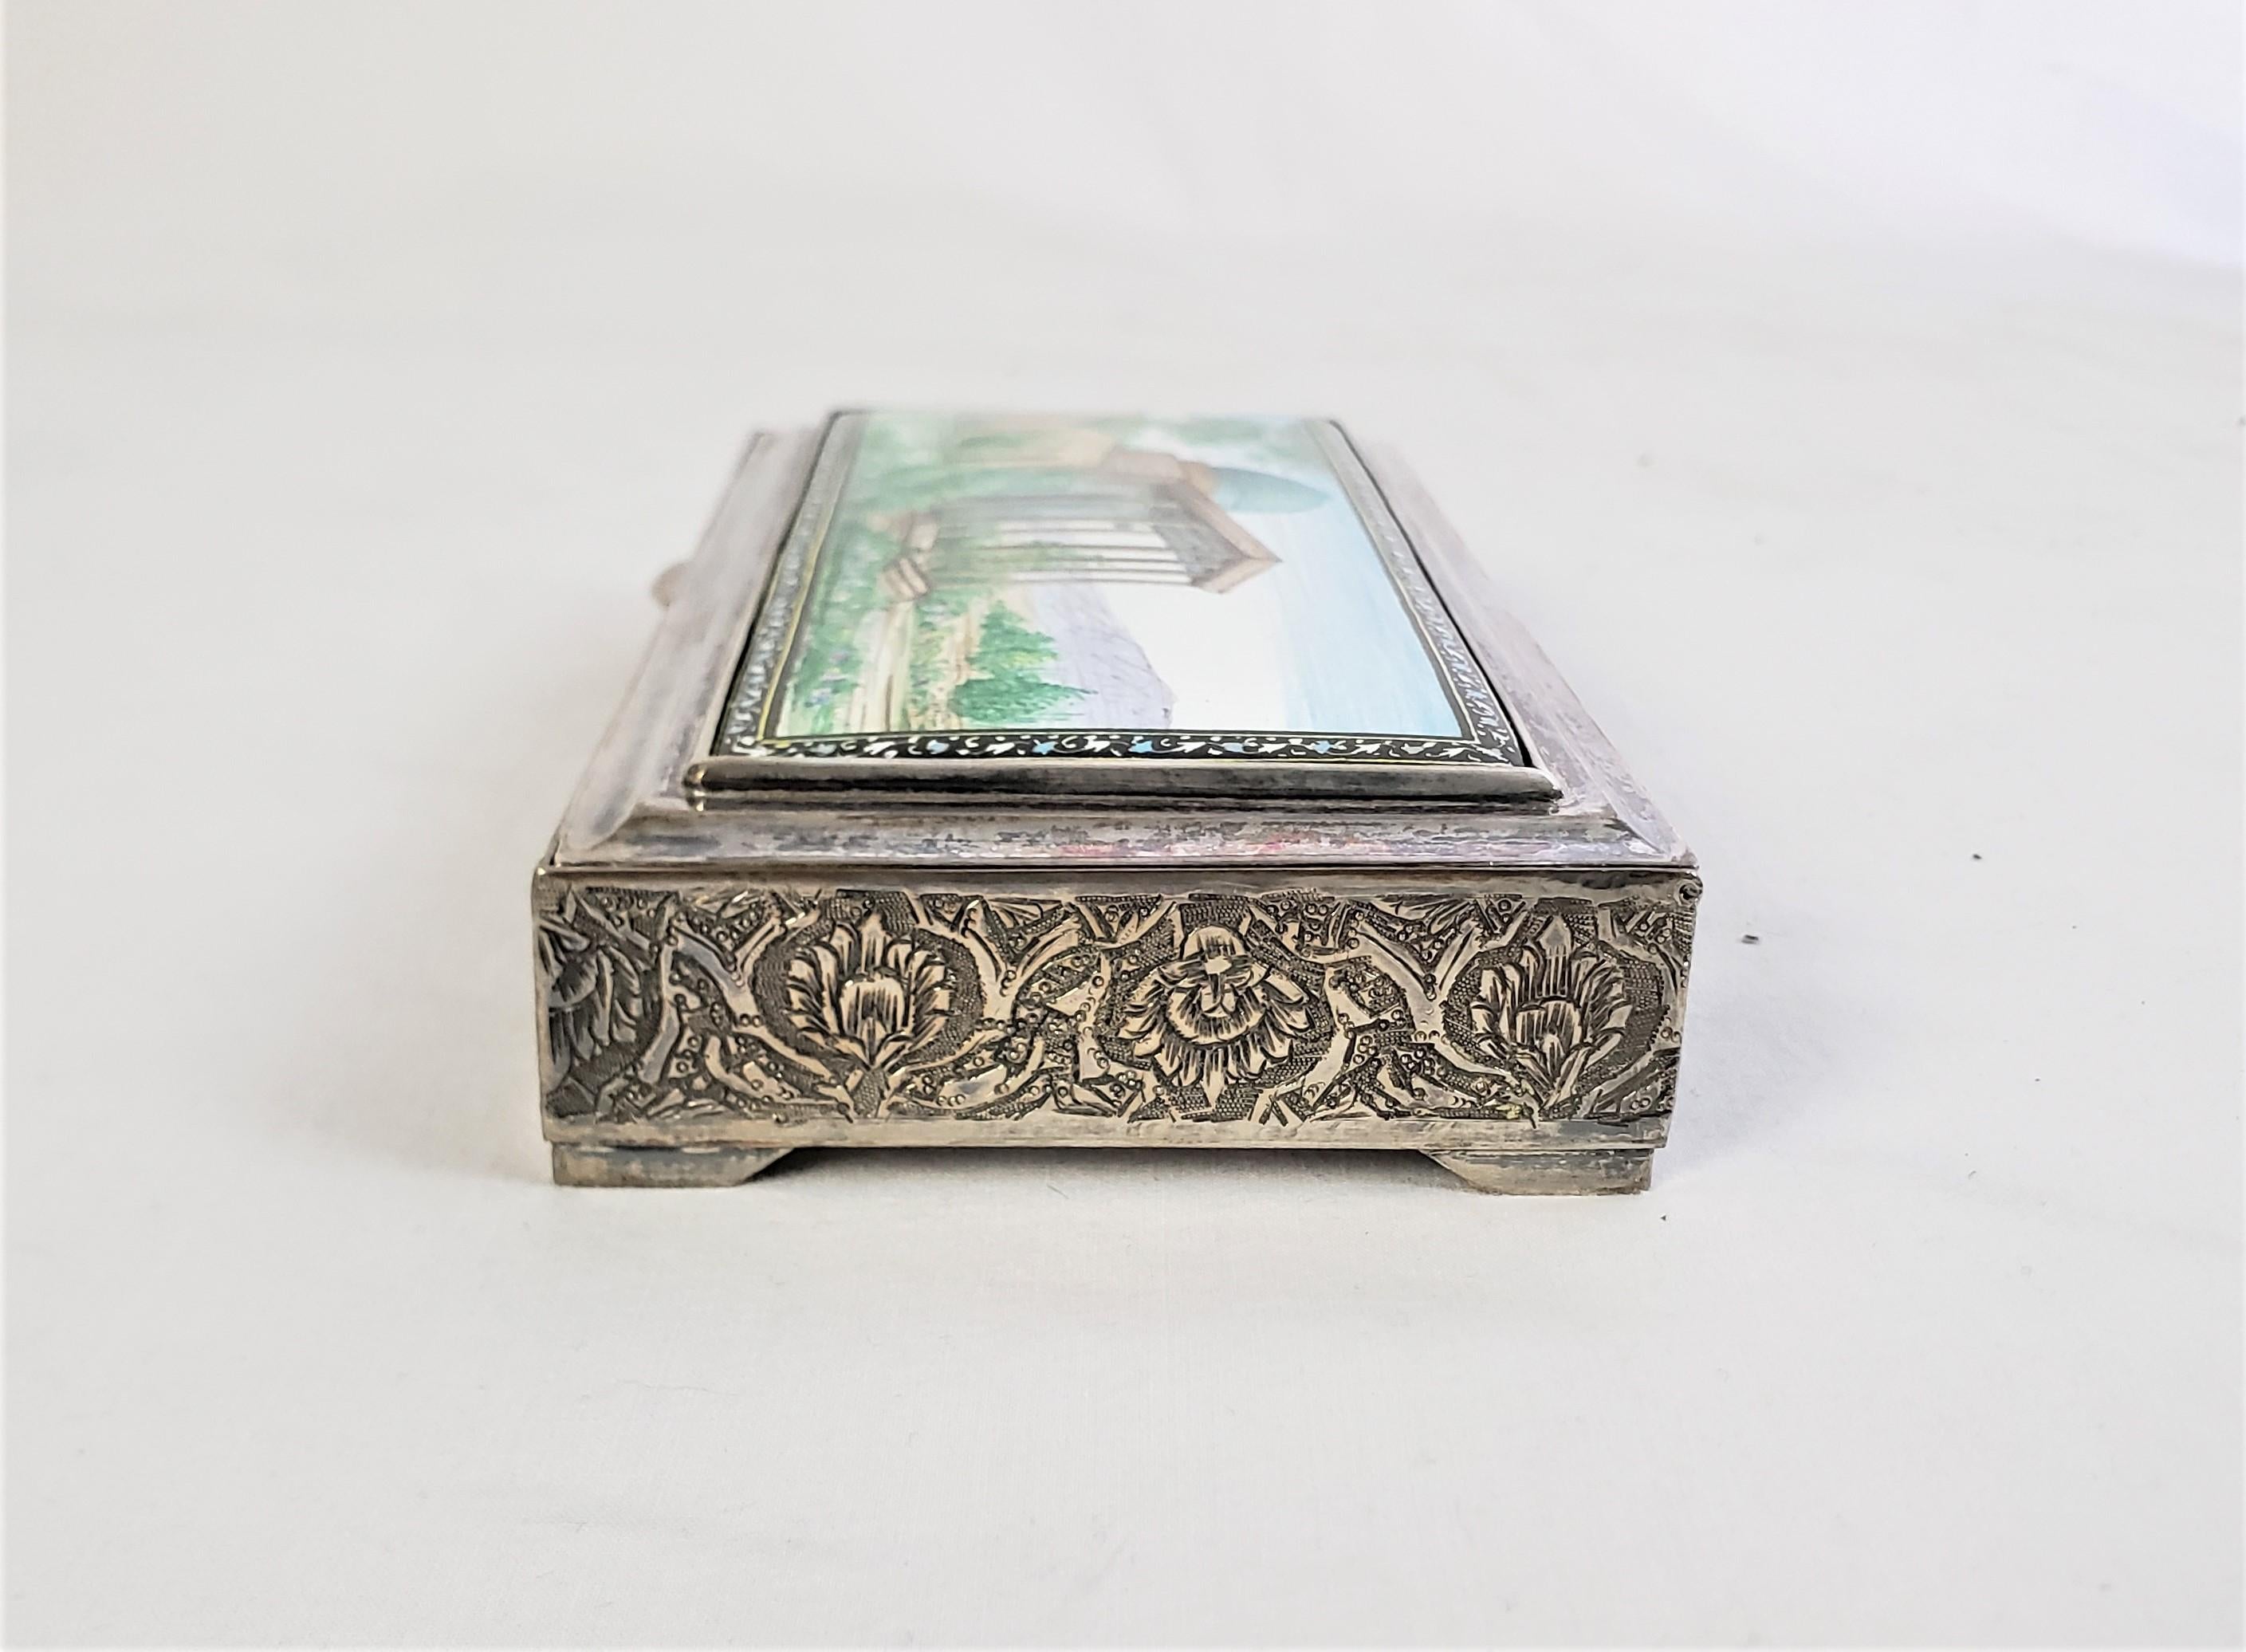 Antique Sterling Silver & Enamel Arabian Box with Chased Decoration In Good Condition For Sale In Hamilton, Ontario